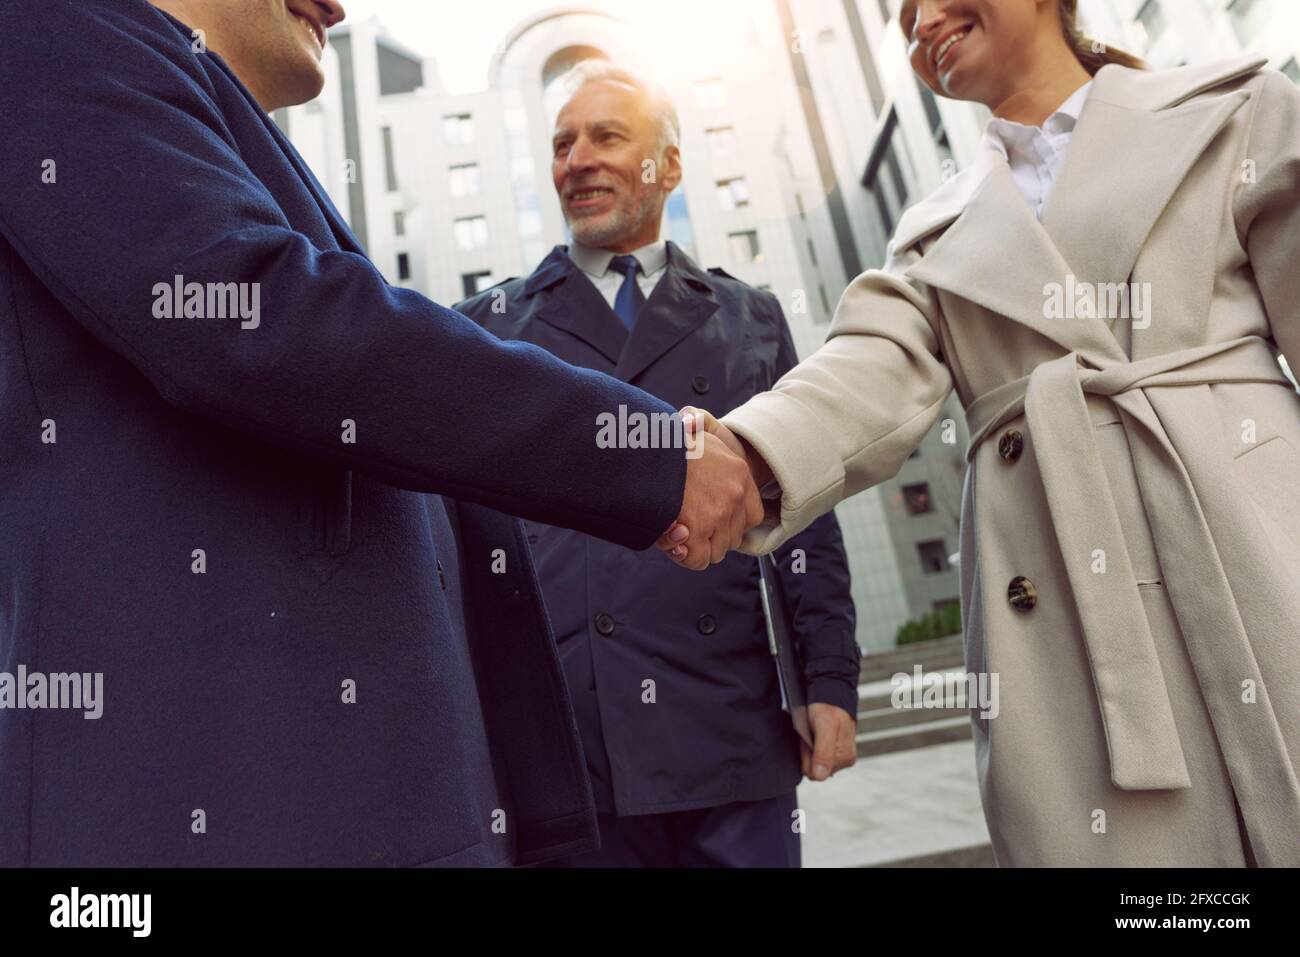 Handshaking business person in office as teamwork and partnership. Stock Photo